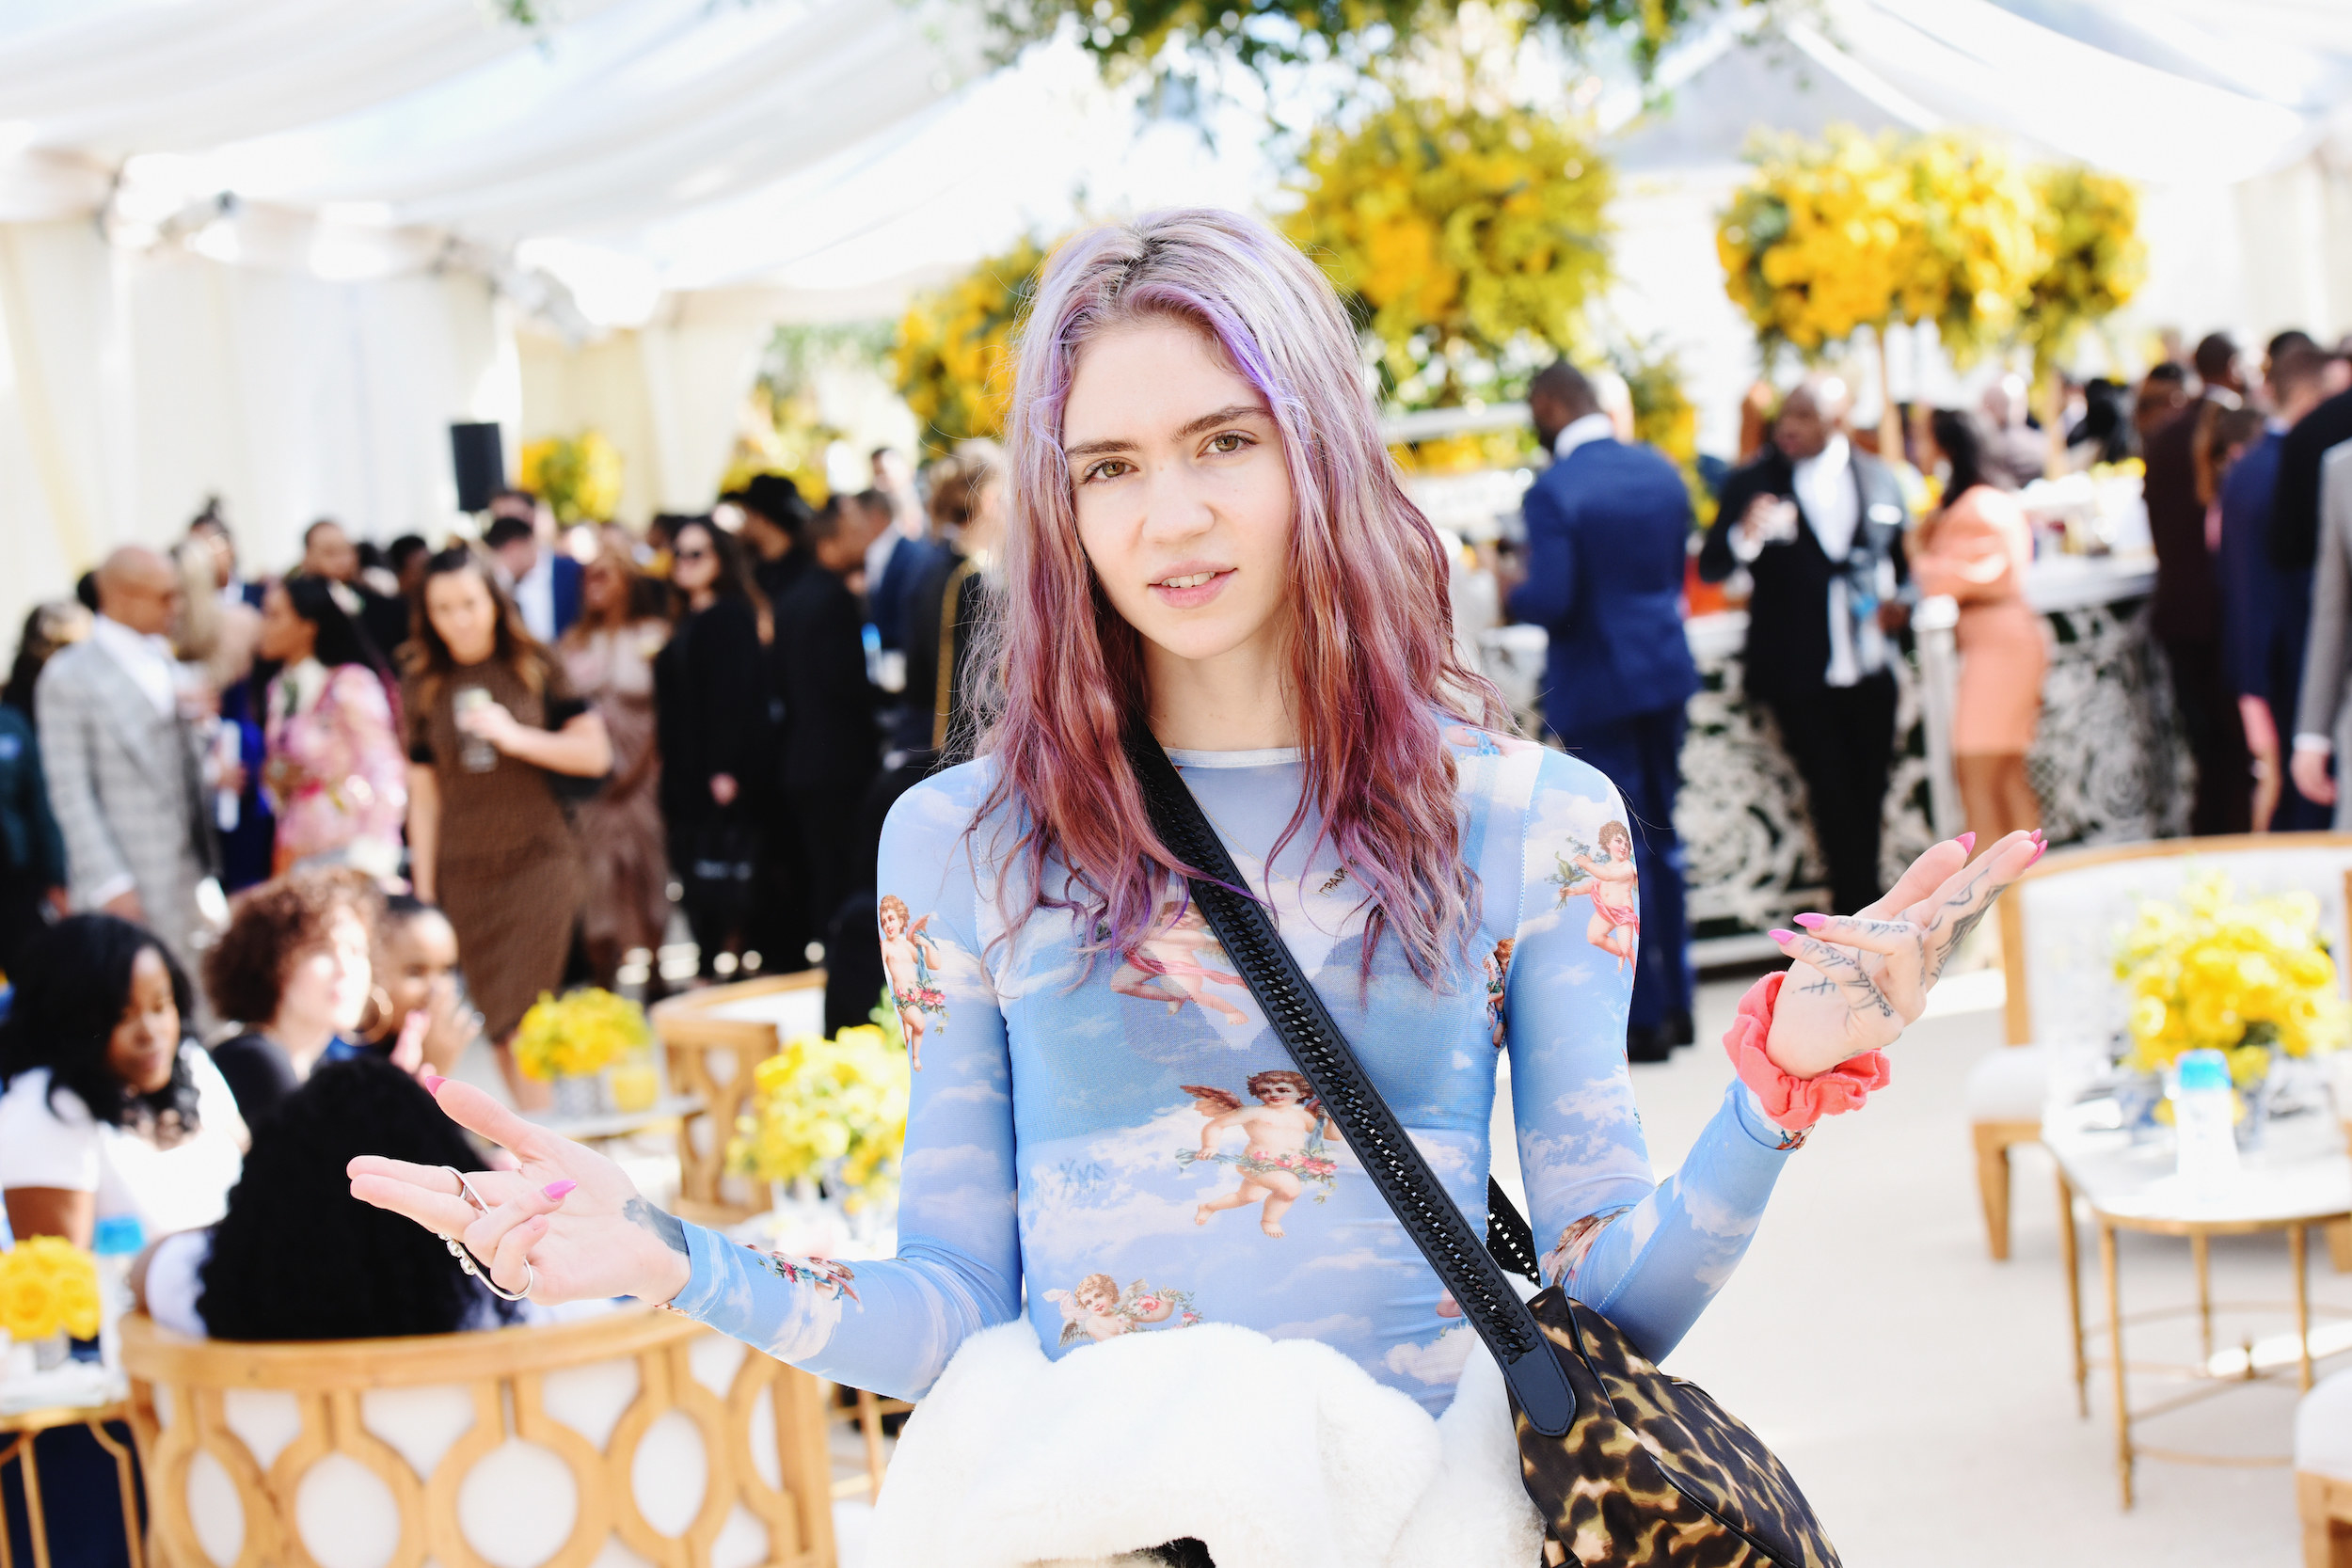 grimes at an event